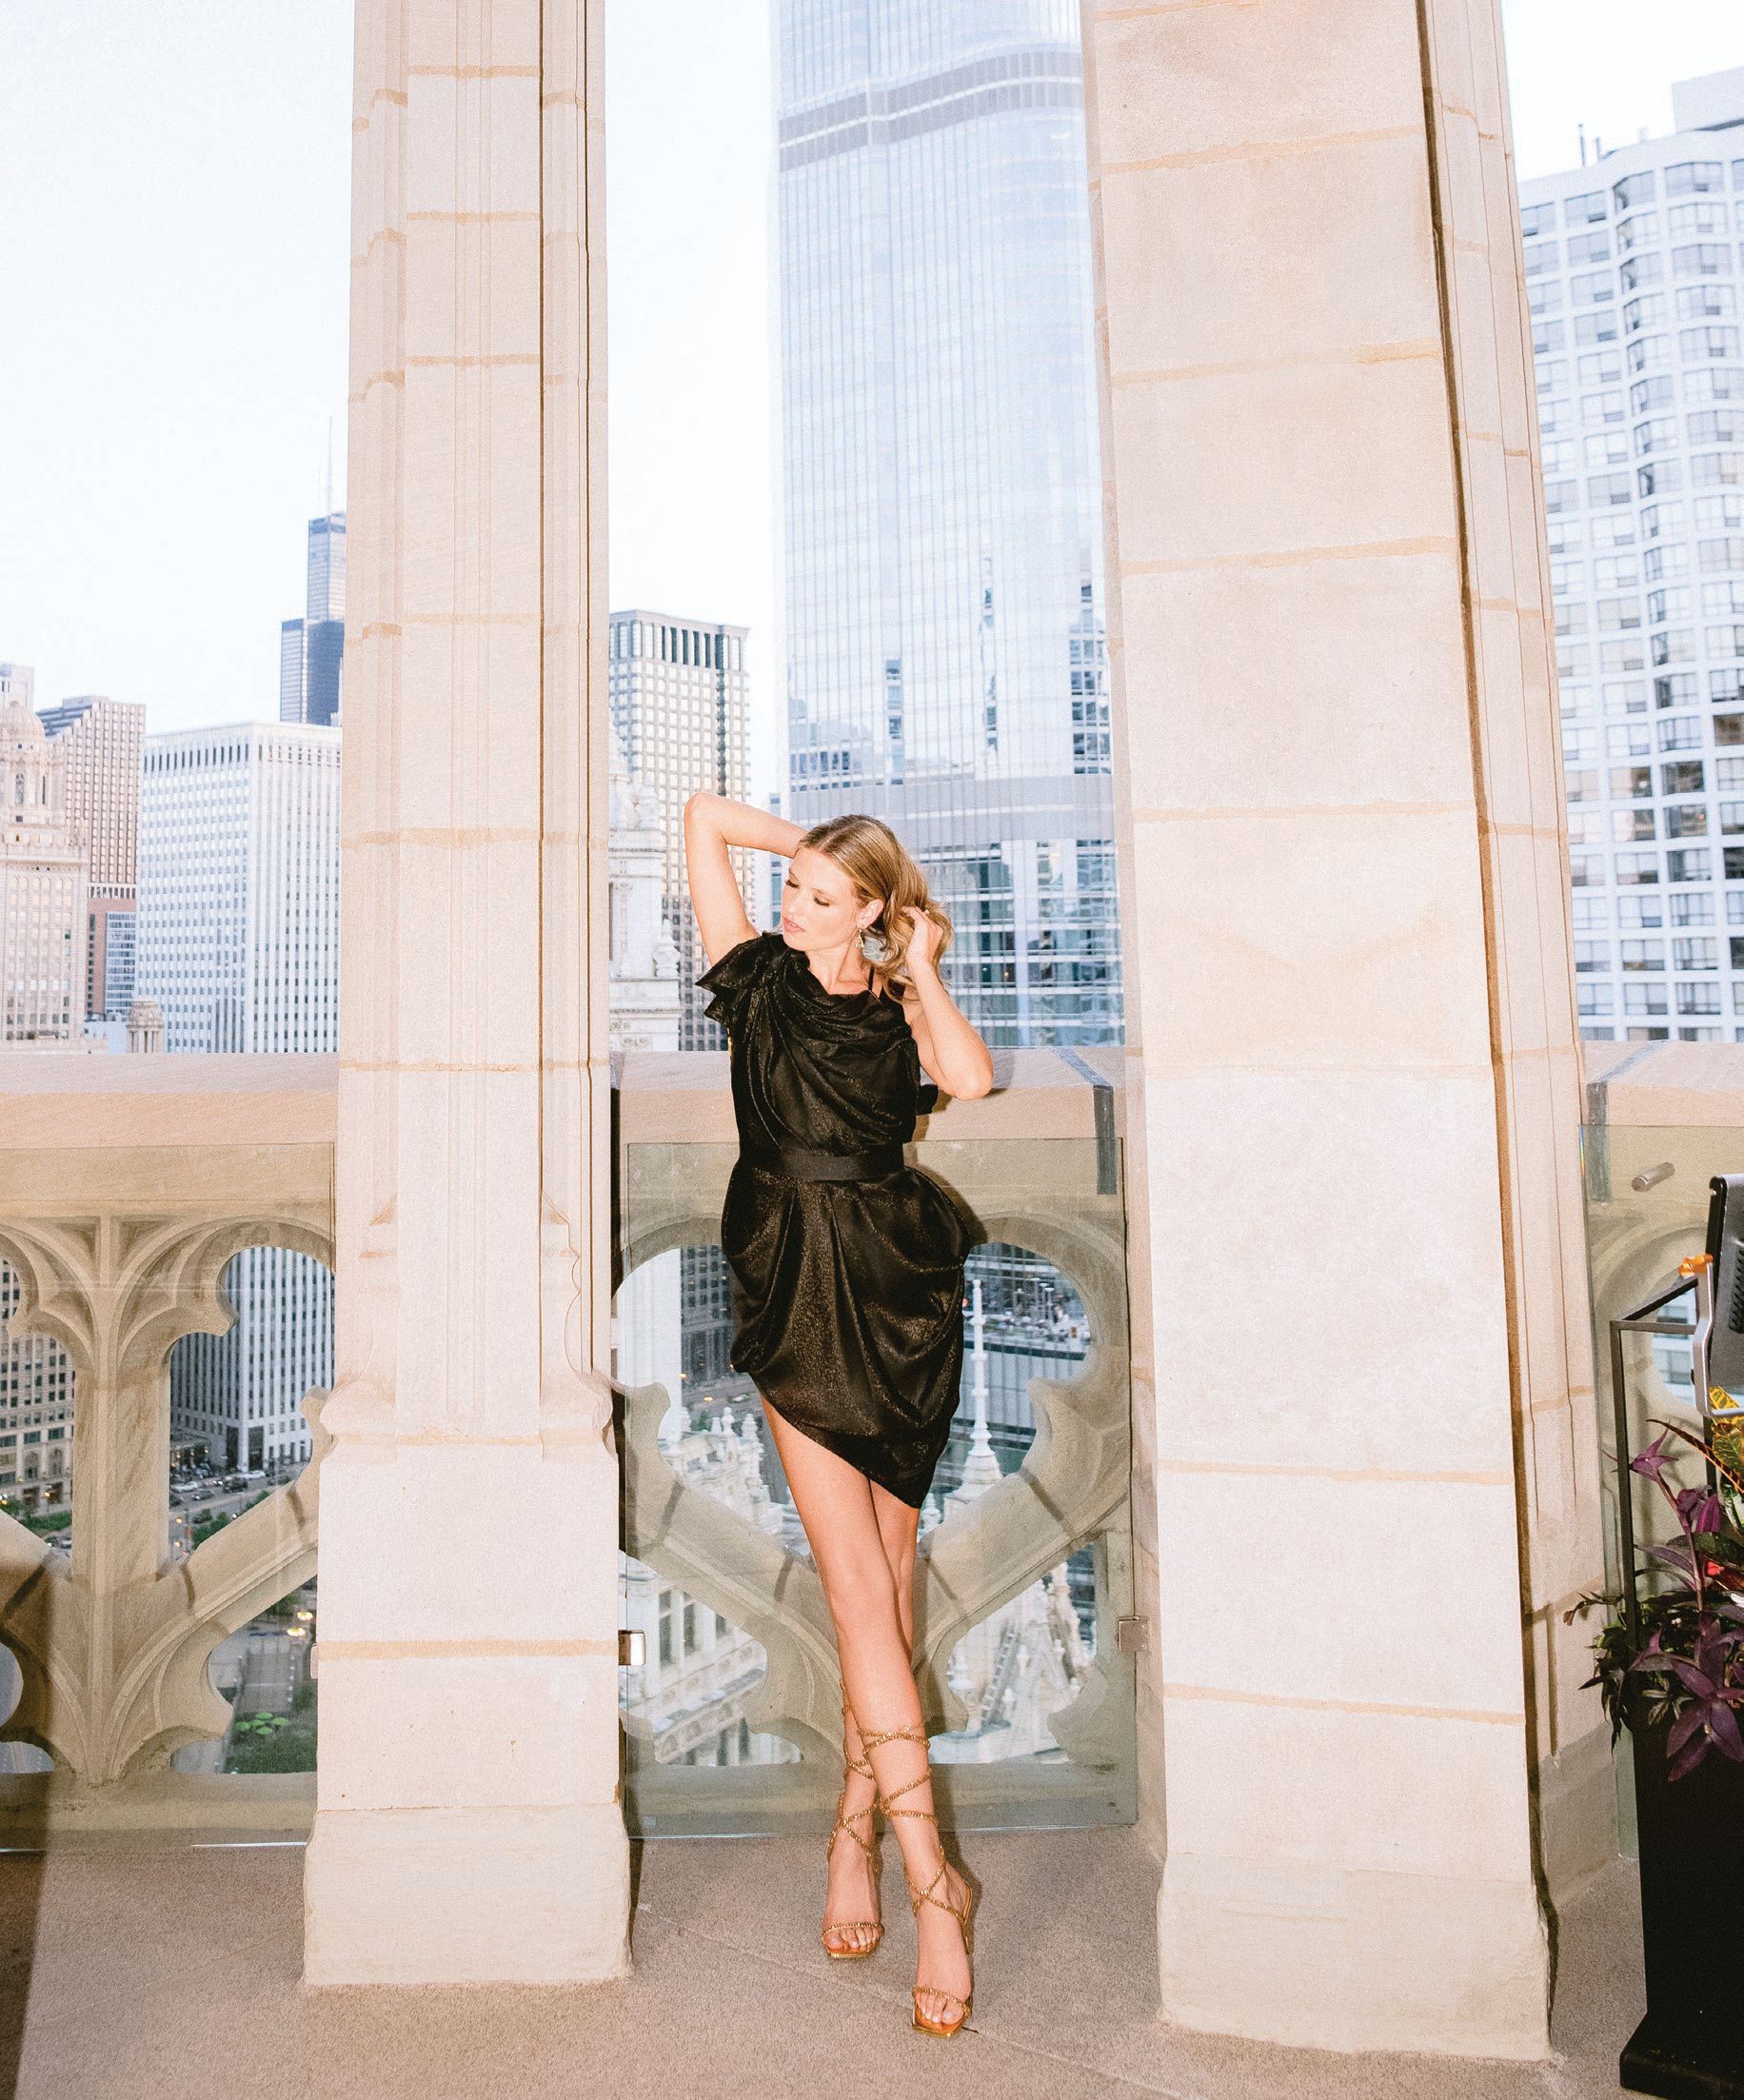 Black double-faced silk charmeuse with gold fleck asymmetrically draped minidress, featuring a crisscross ribbon open back. PHOTO BY LISA BLUME